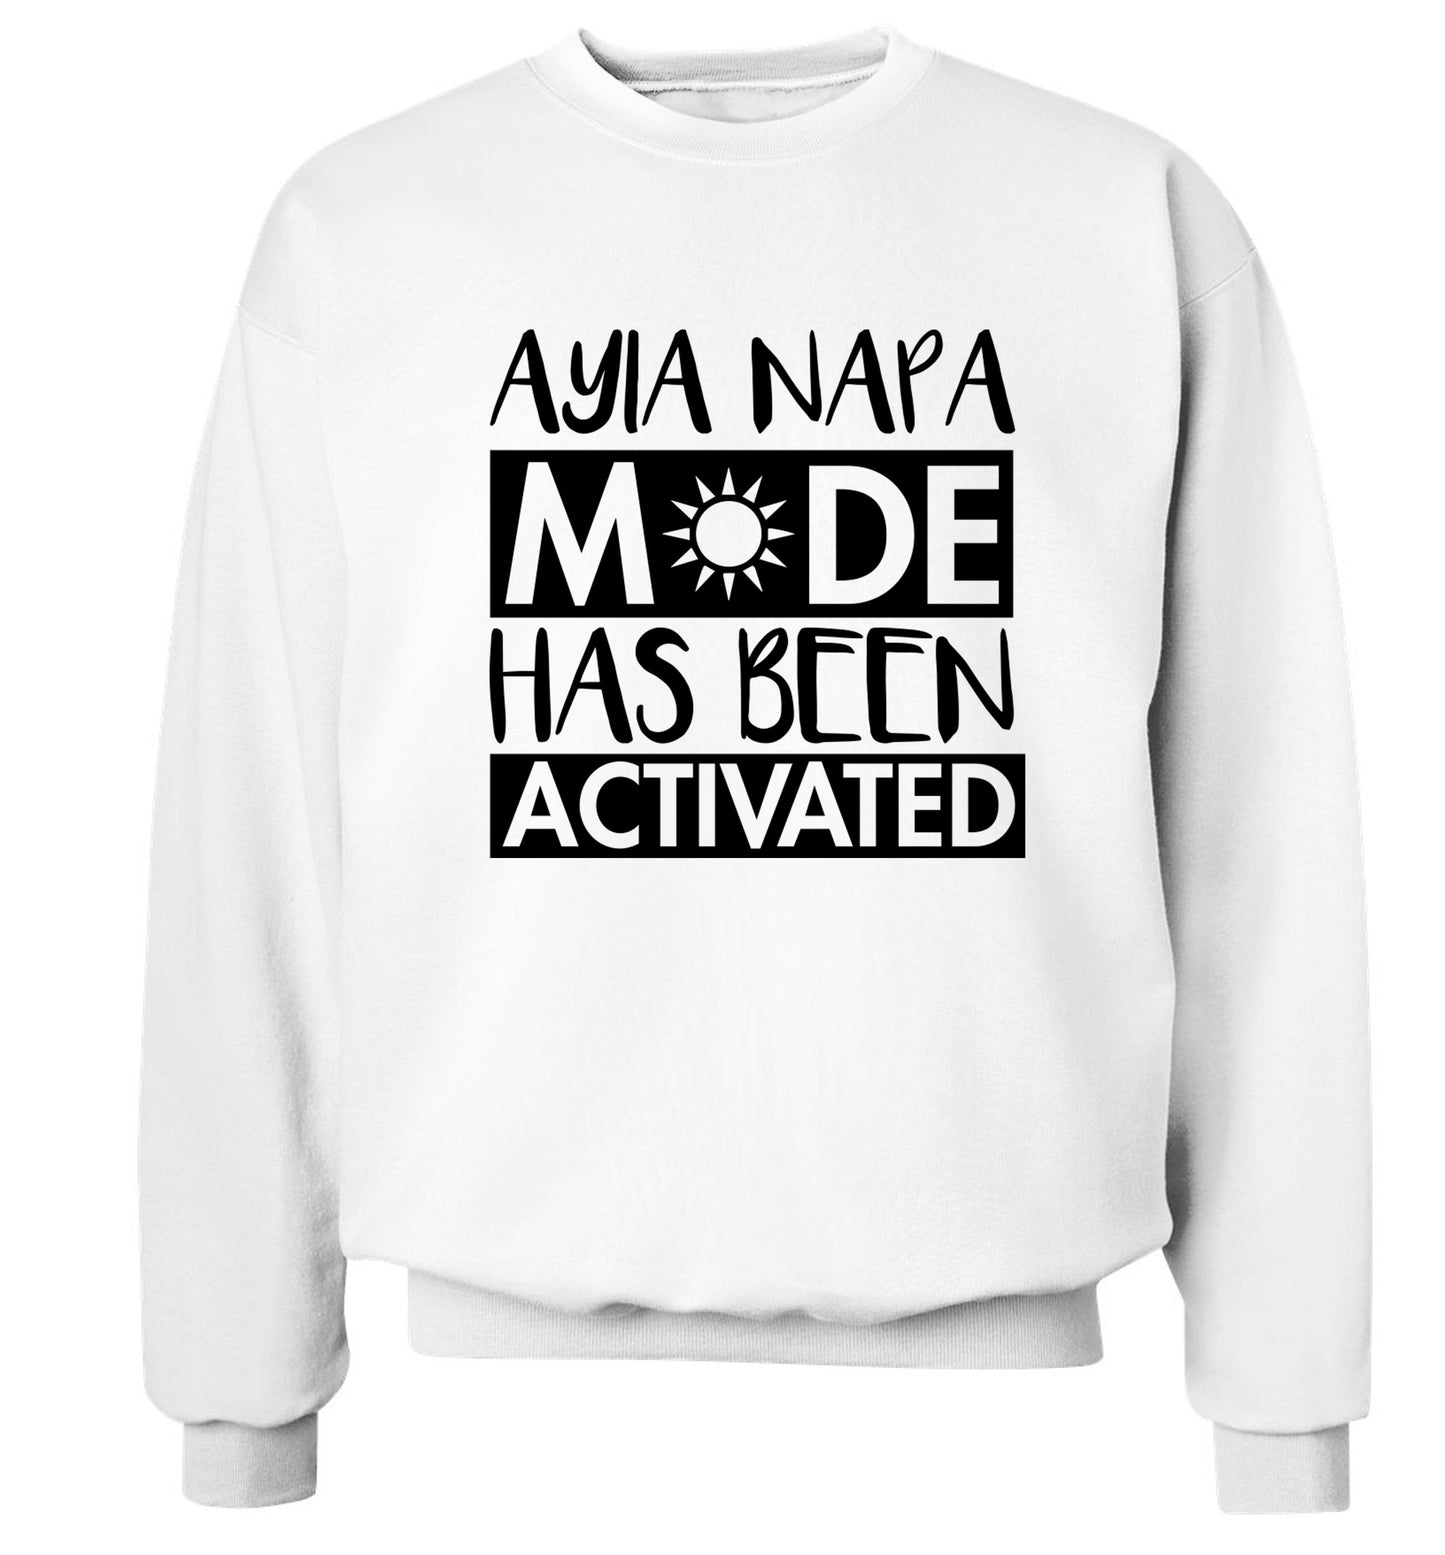 Aiya Napa mode has been activated Adult's unisex white Sweater 2XL